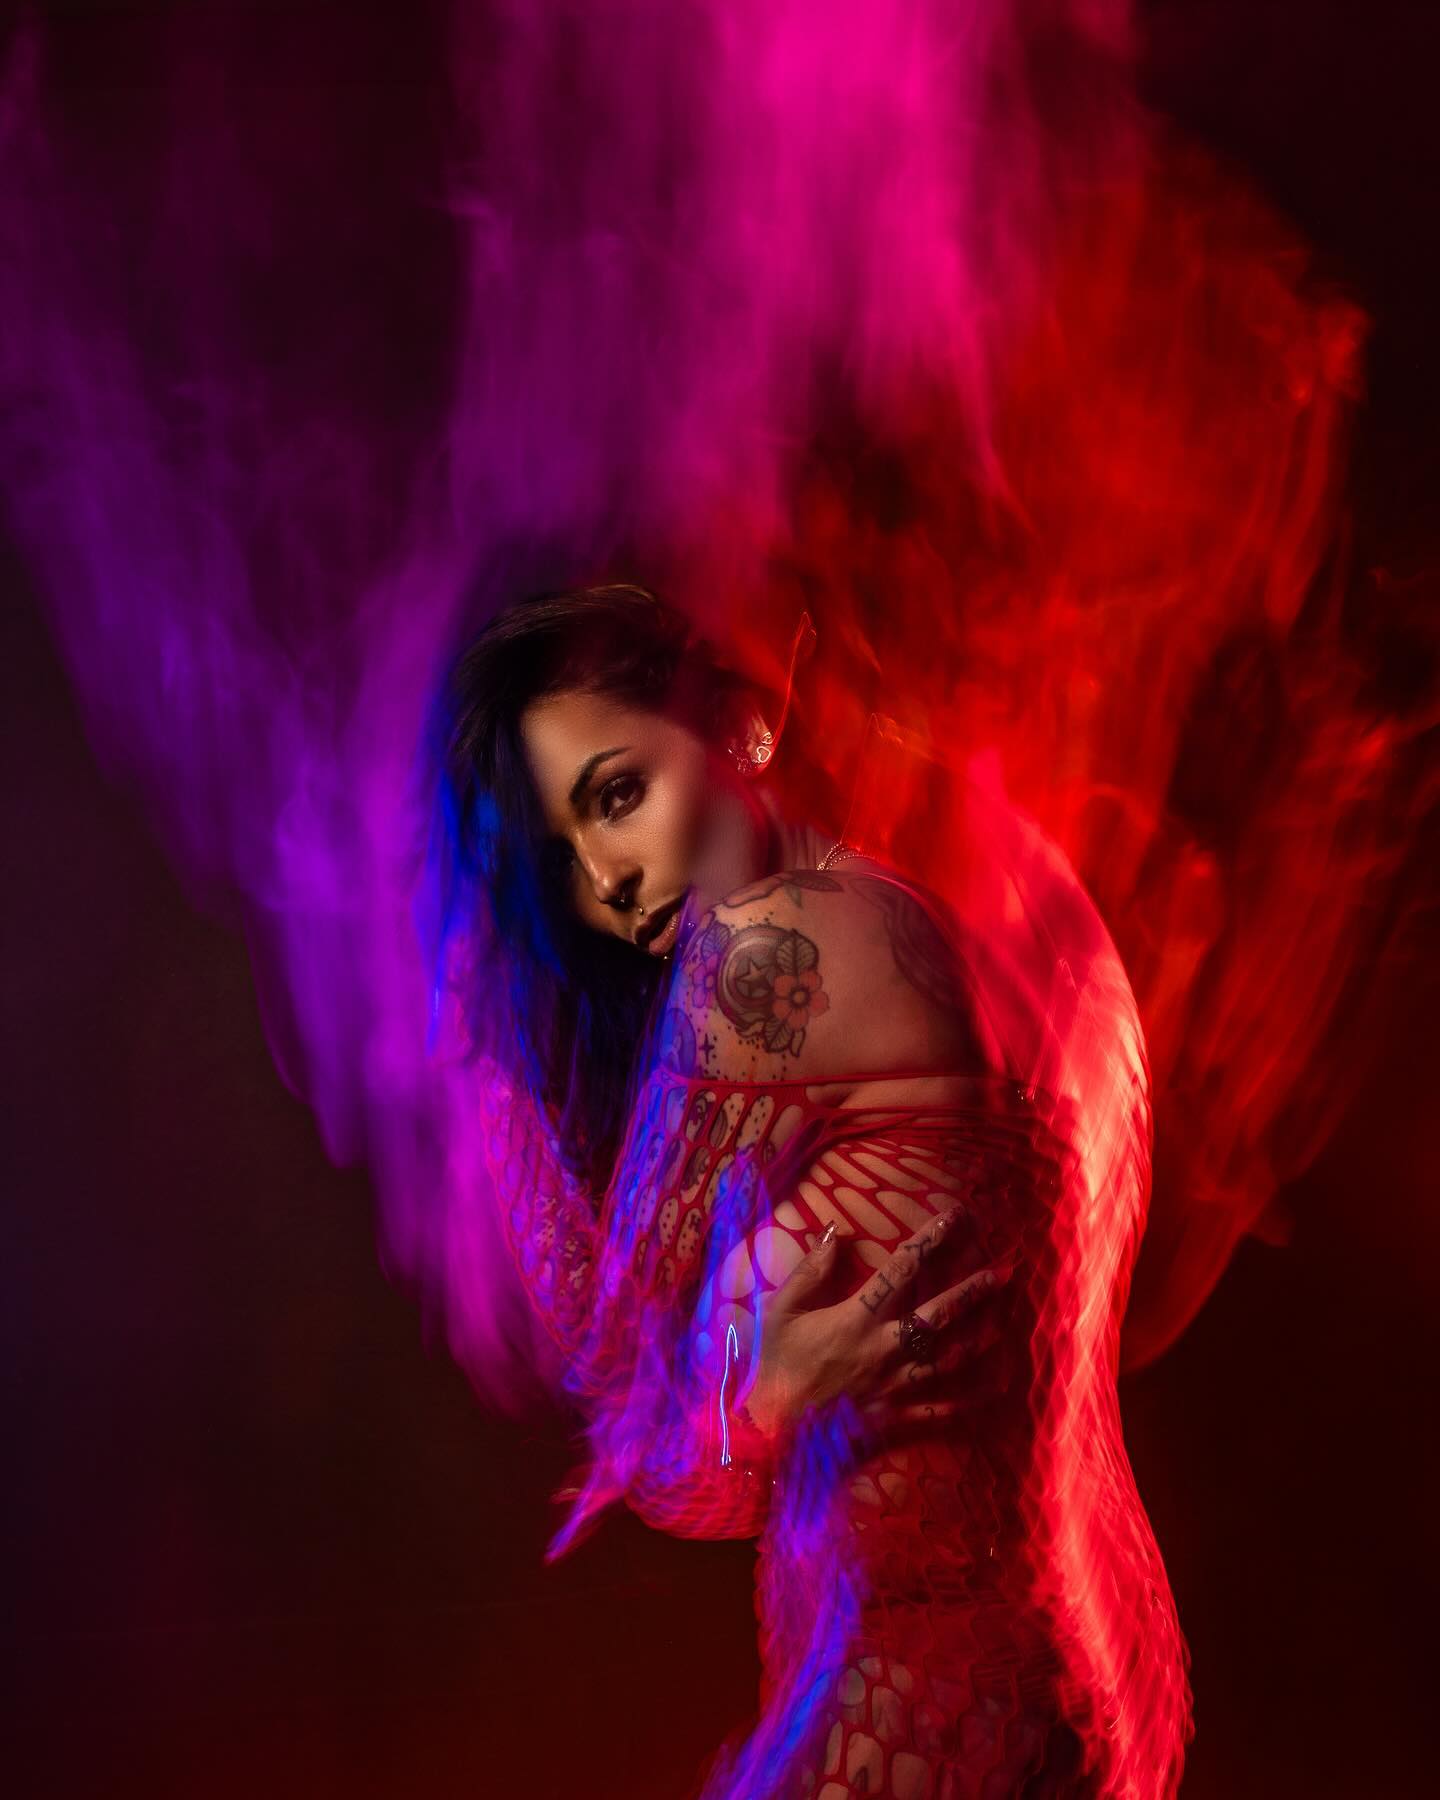 You can’t beat experimenting with photography especially when you get a result that you love!

Shutter drag, some LED’s and a #smokeninja 

If you want to try different stuff on your shoot then send me a DM

Photographer @jodywright_photography @wright_image1 
Model @missblackreign 
Location @old.town.studio